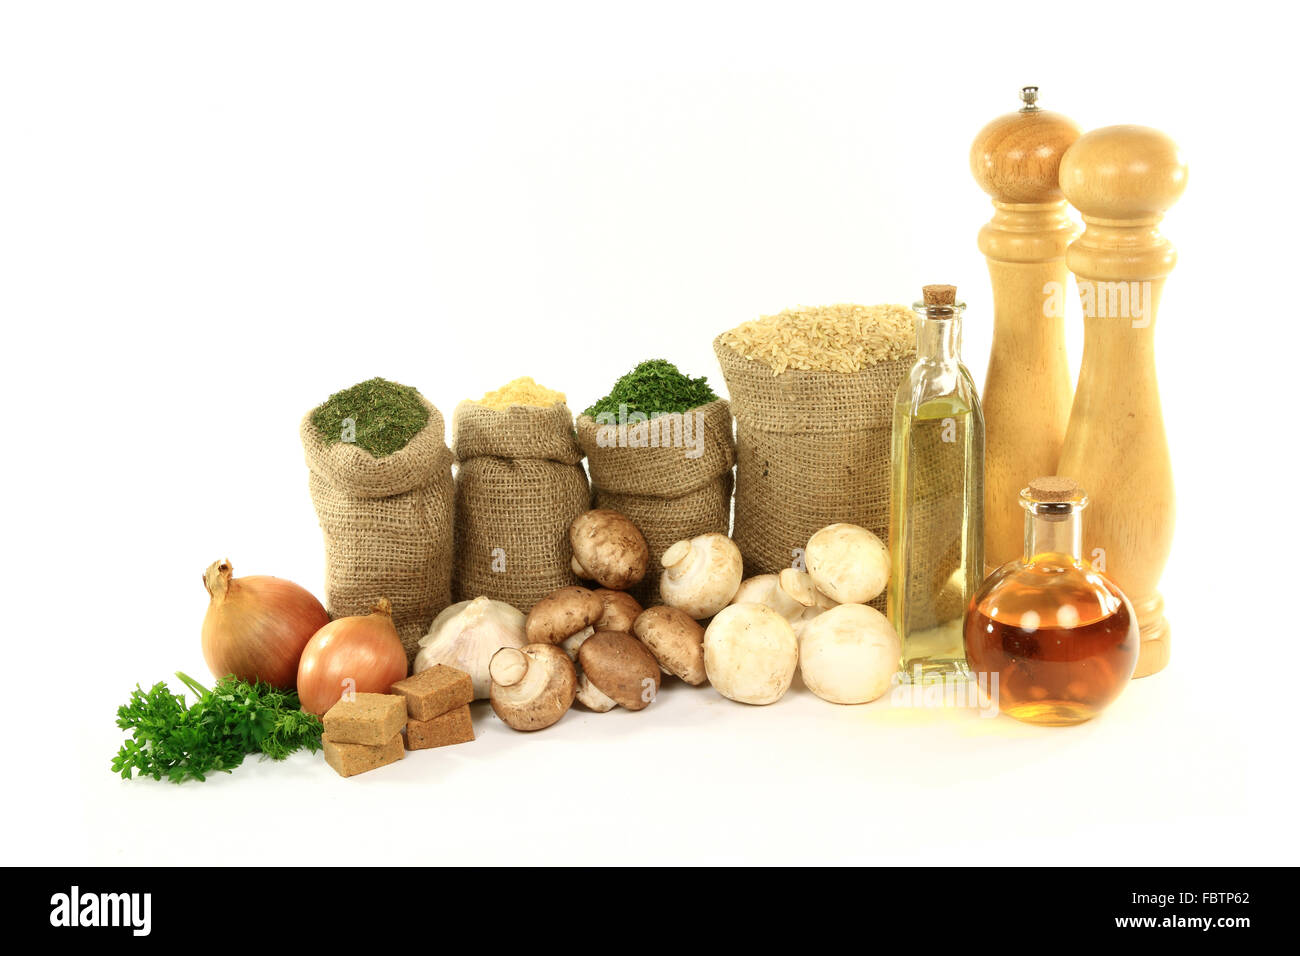 Products for Cooking mushrooms on rice. Stock Photo